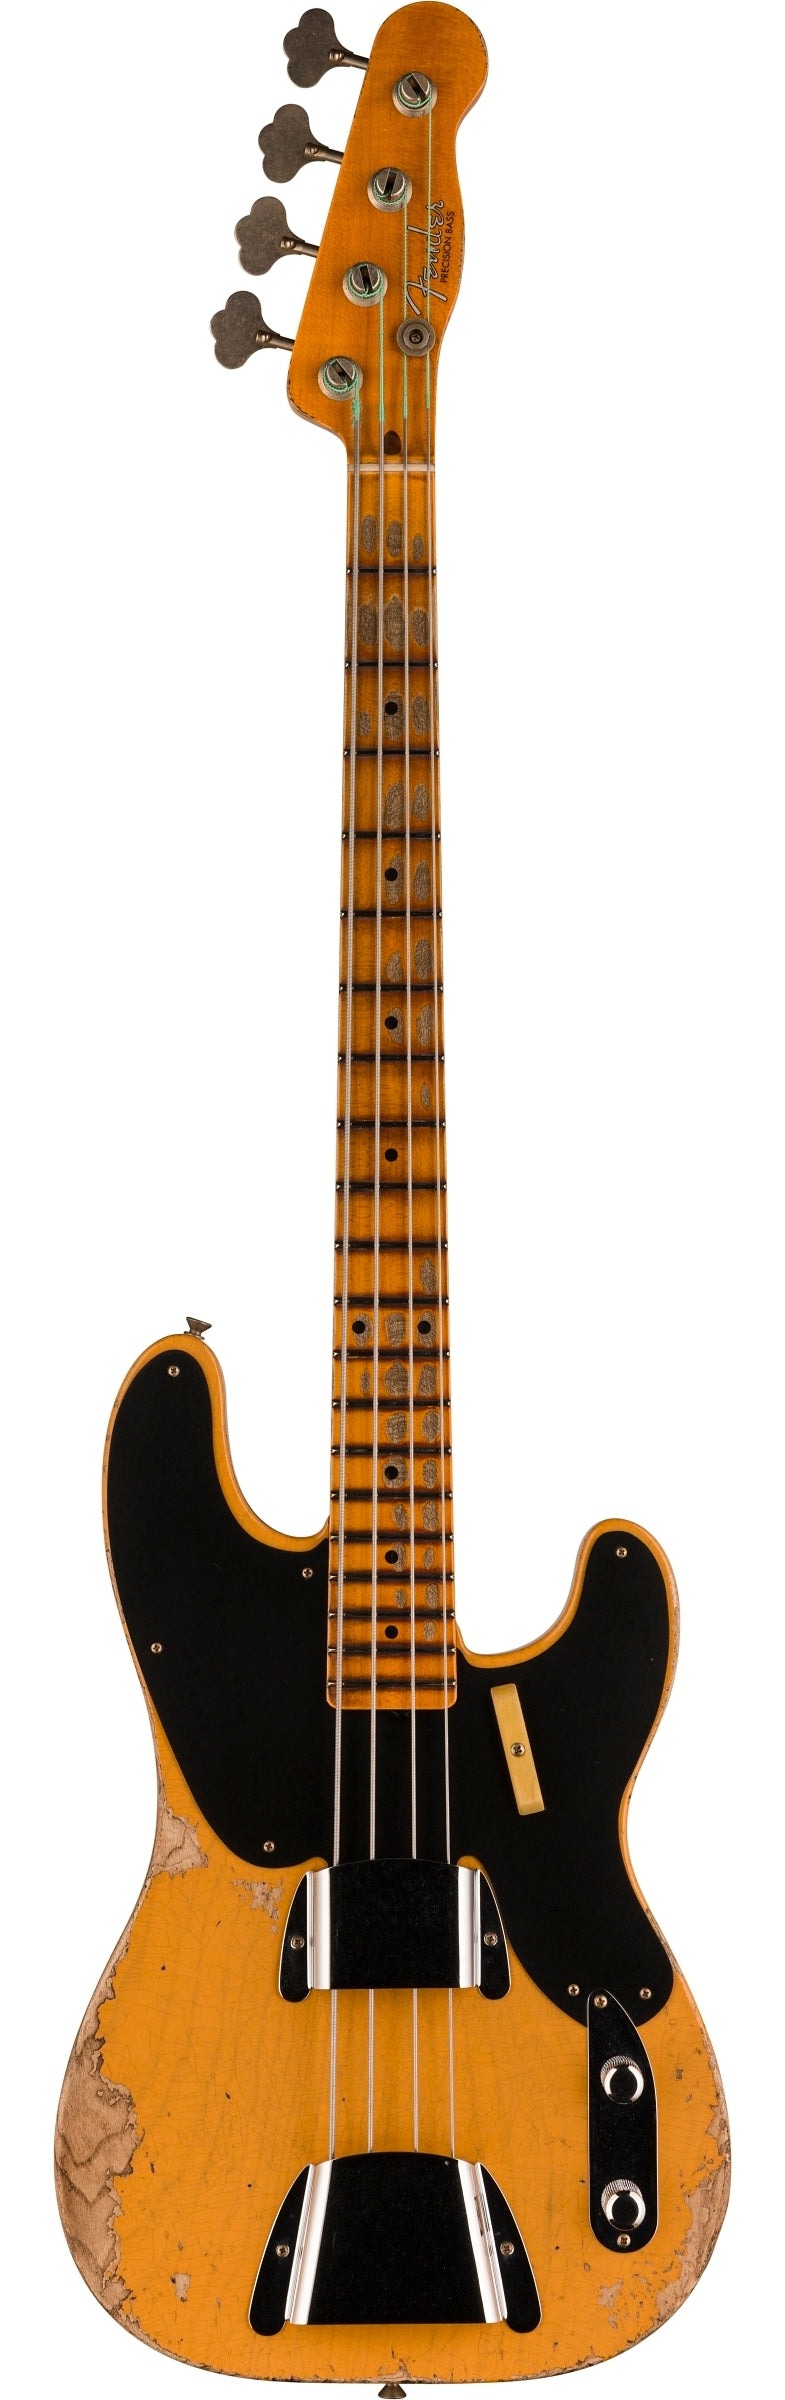 FENDER LIMITED EDITION '53 PRECISION BASS® - HEAVY RELIC®, AGED BUTTERSCOTCH BLONDE